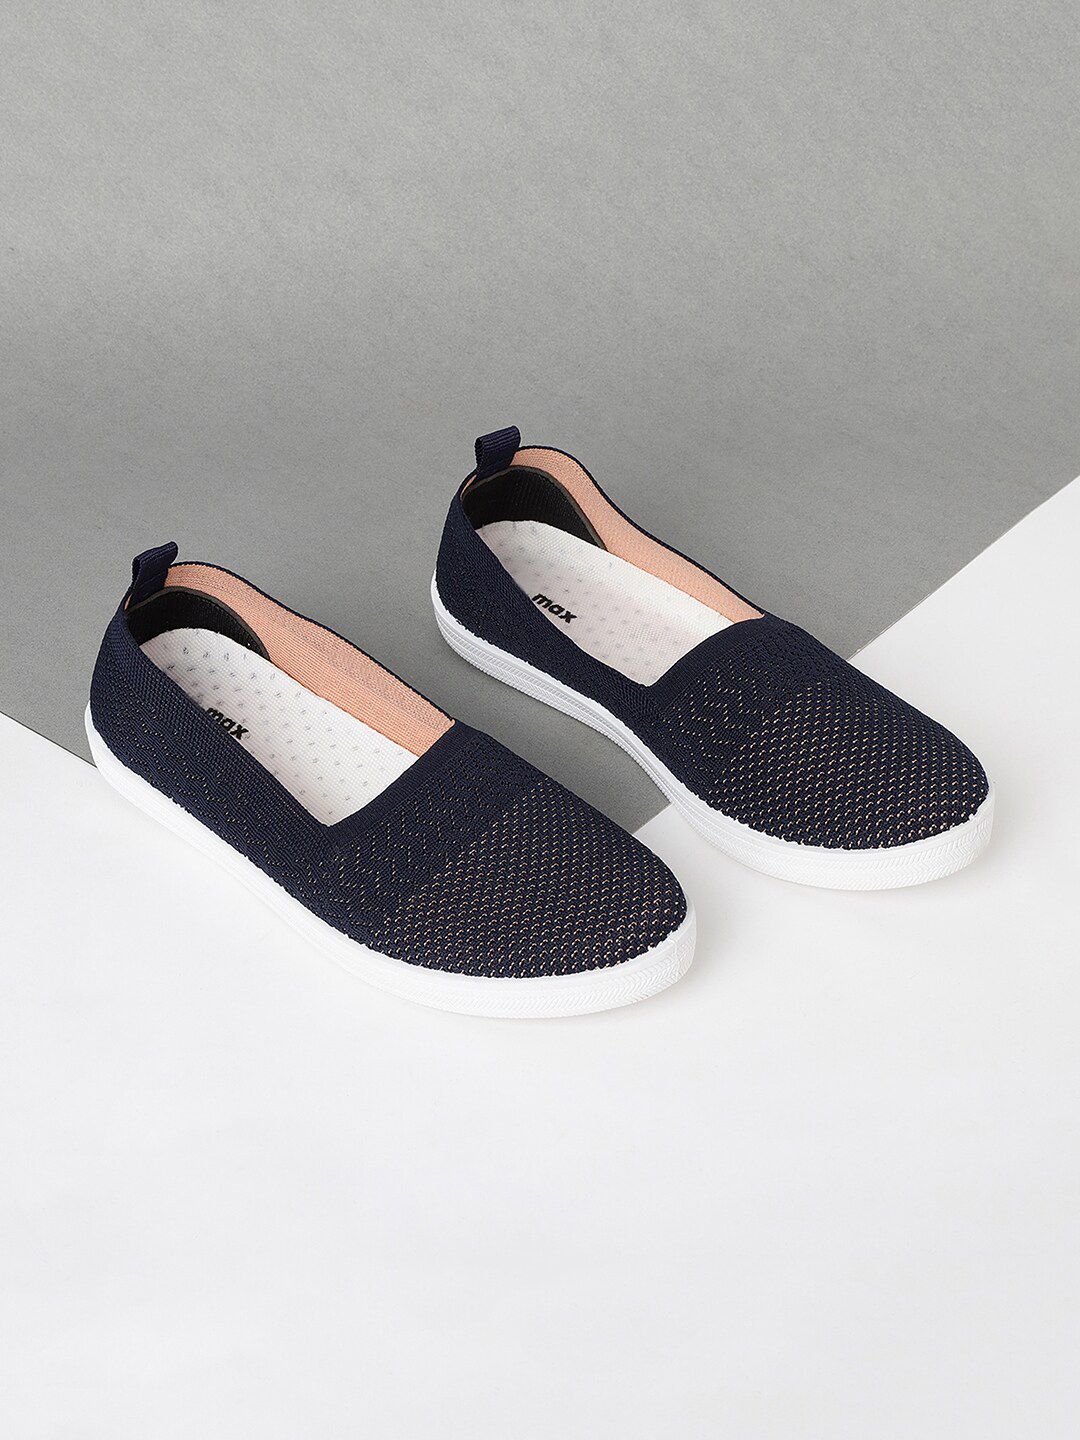 max Women Navy Blue PU Slip-On Sneakers Price in India